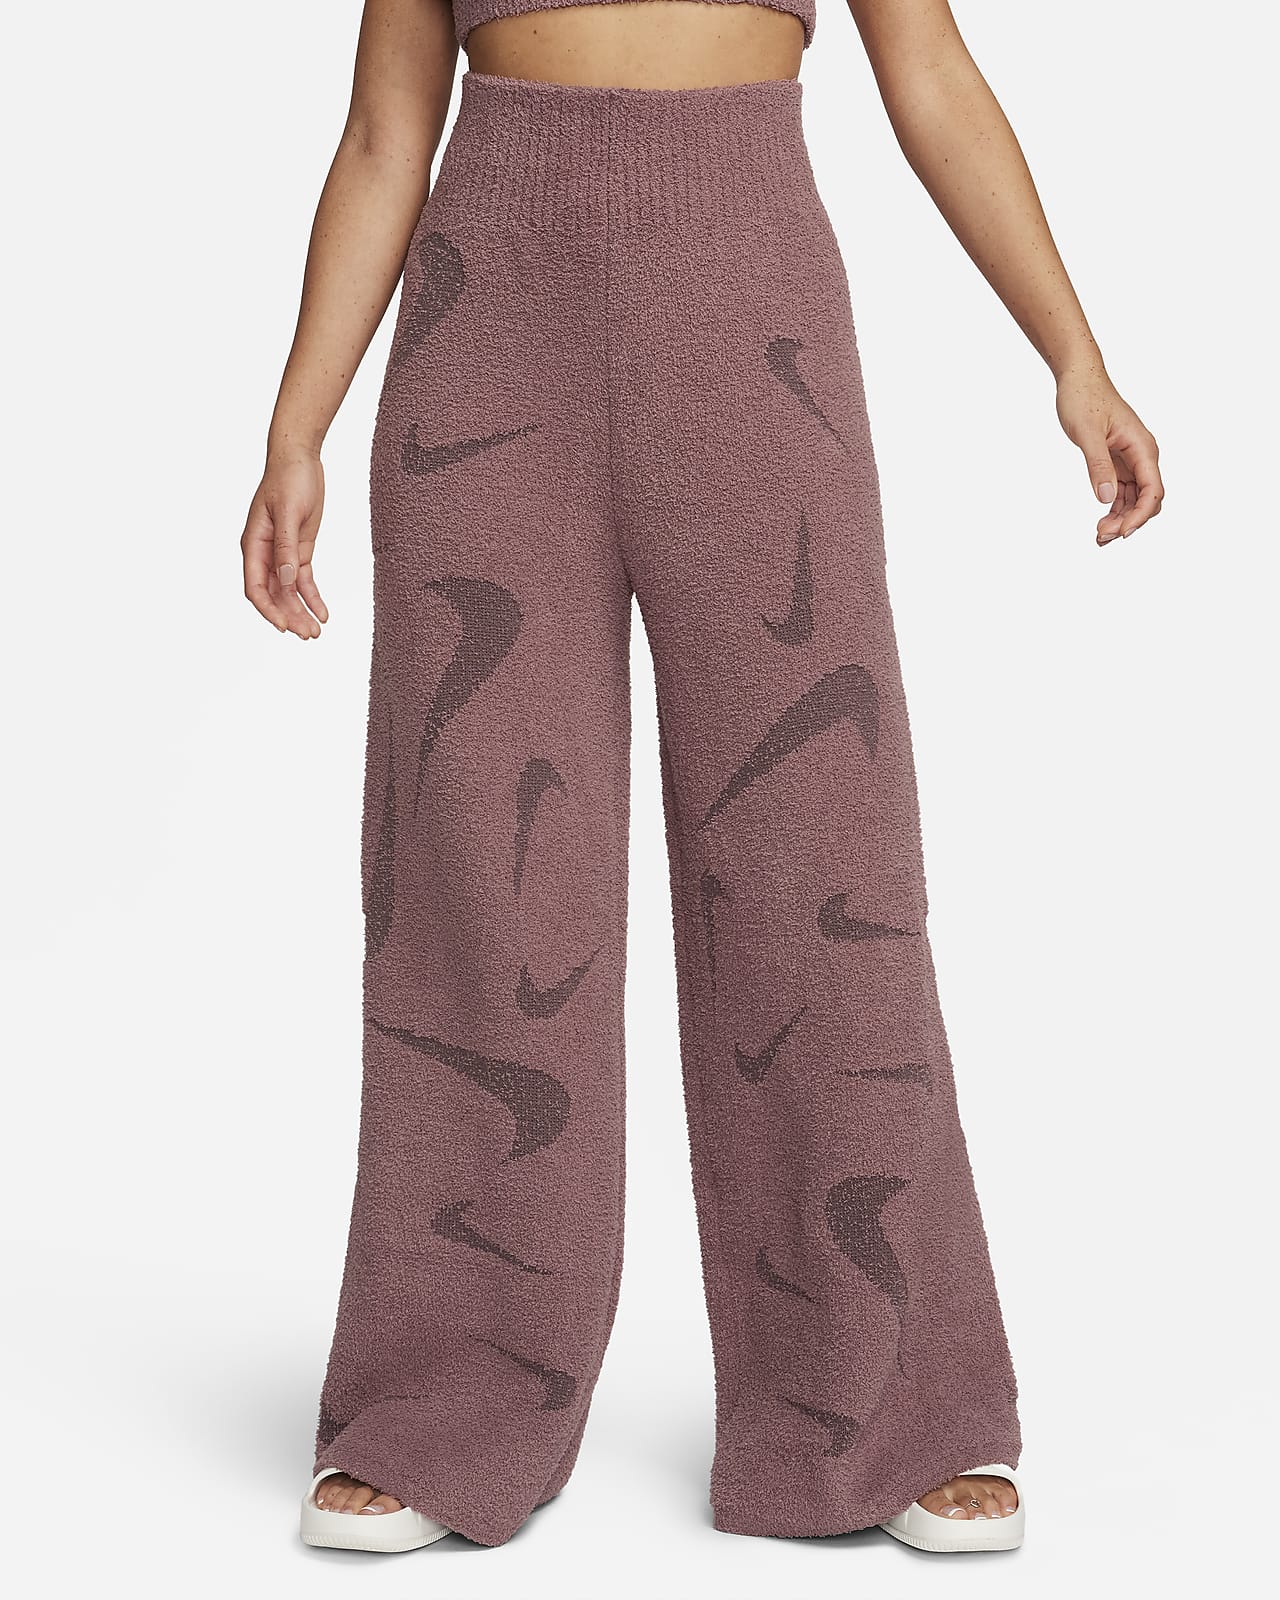 High-Waisted Work Pants - Our Second Nature